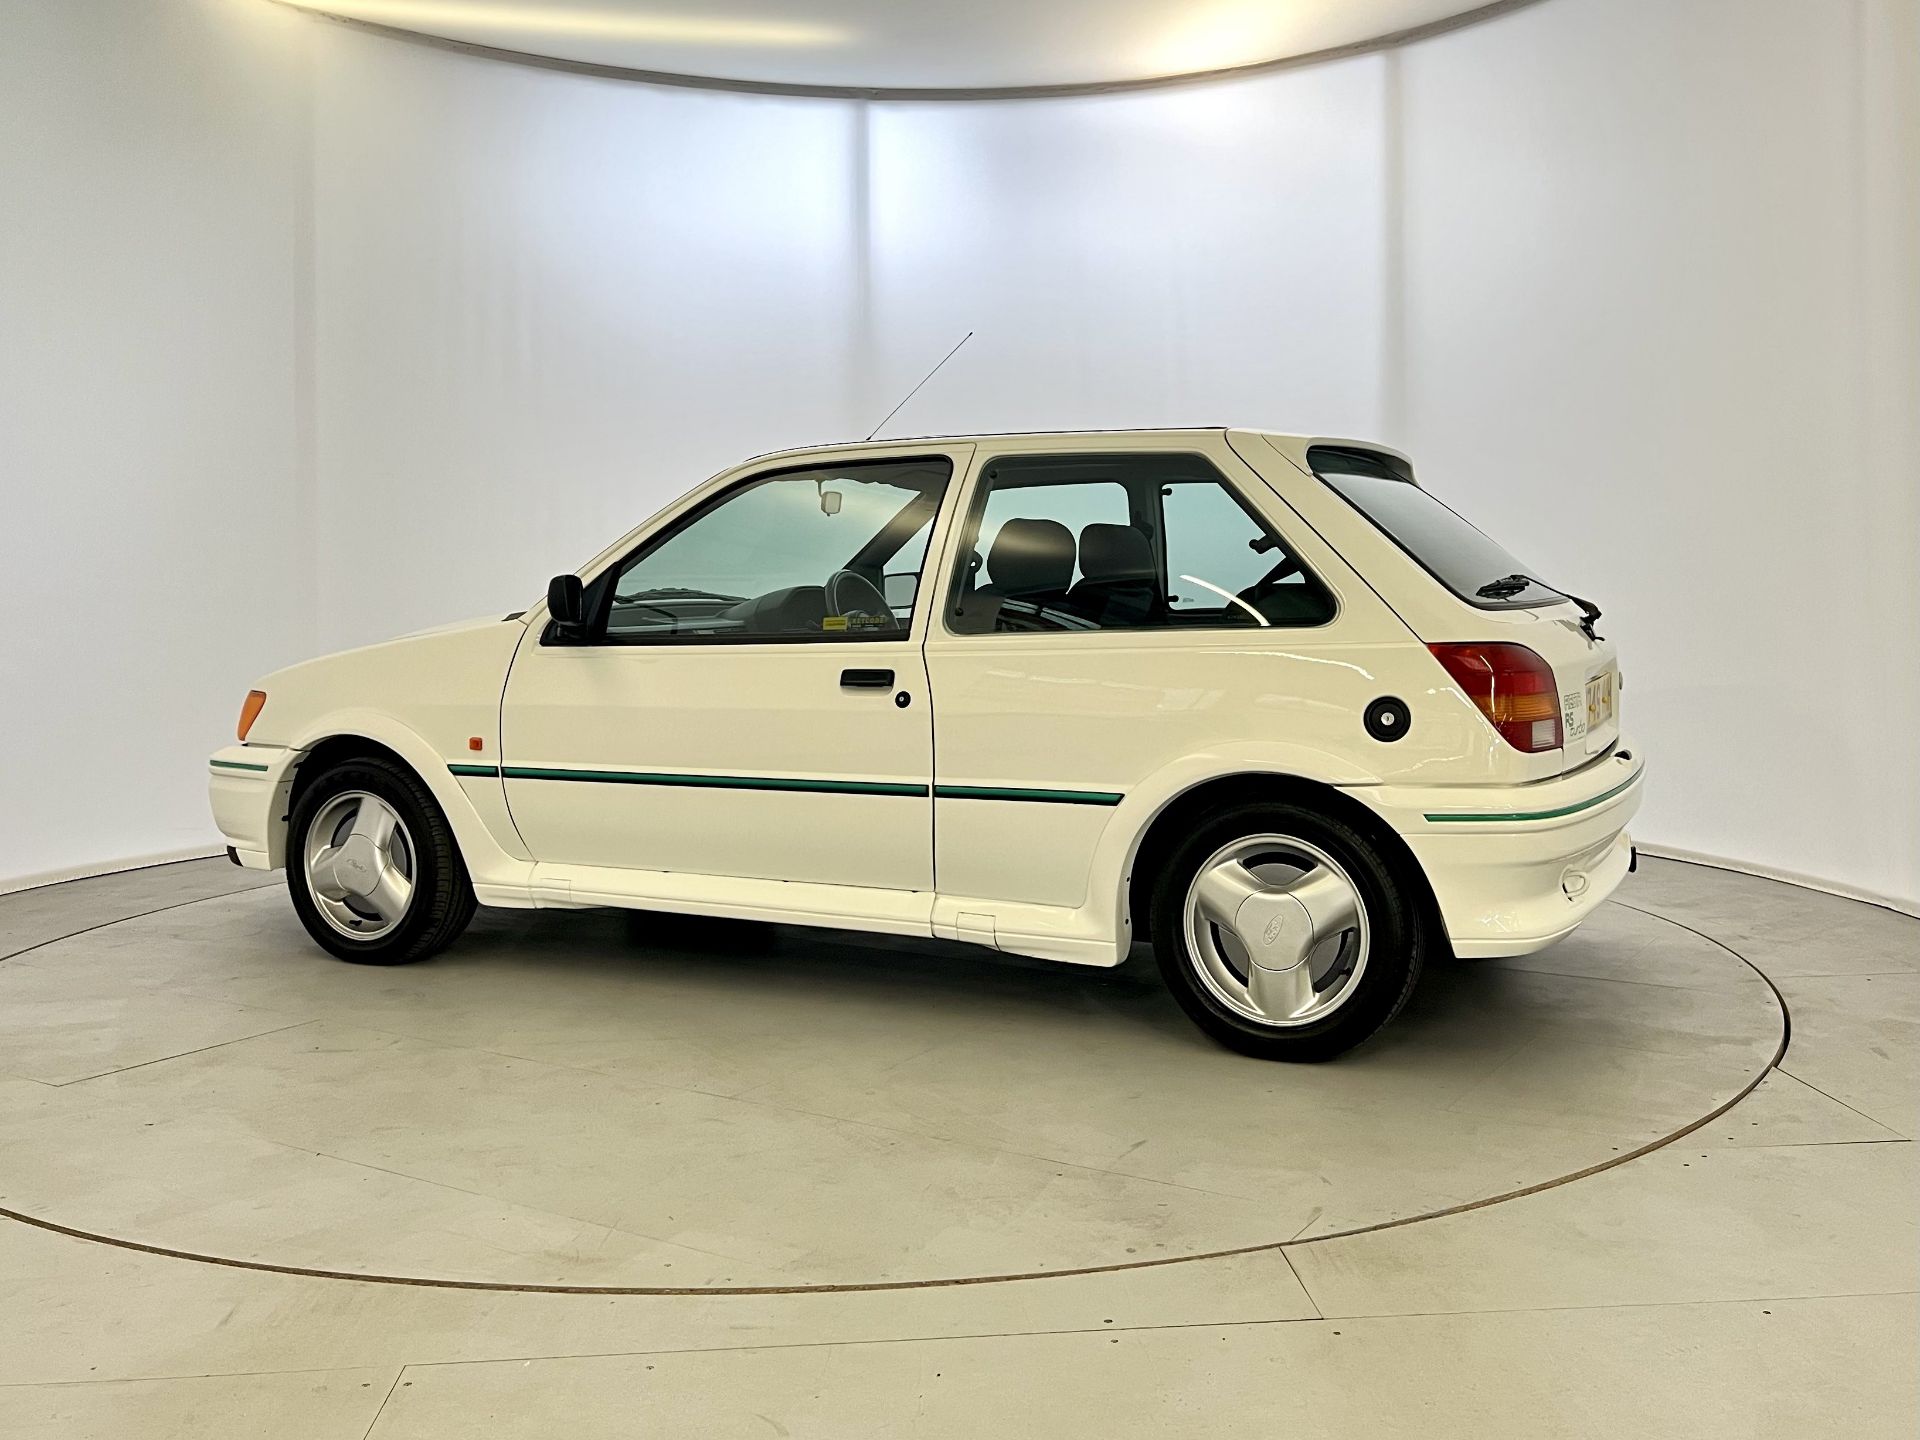 Ford Fiesta RS Turbo - Image 6 of 33